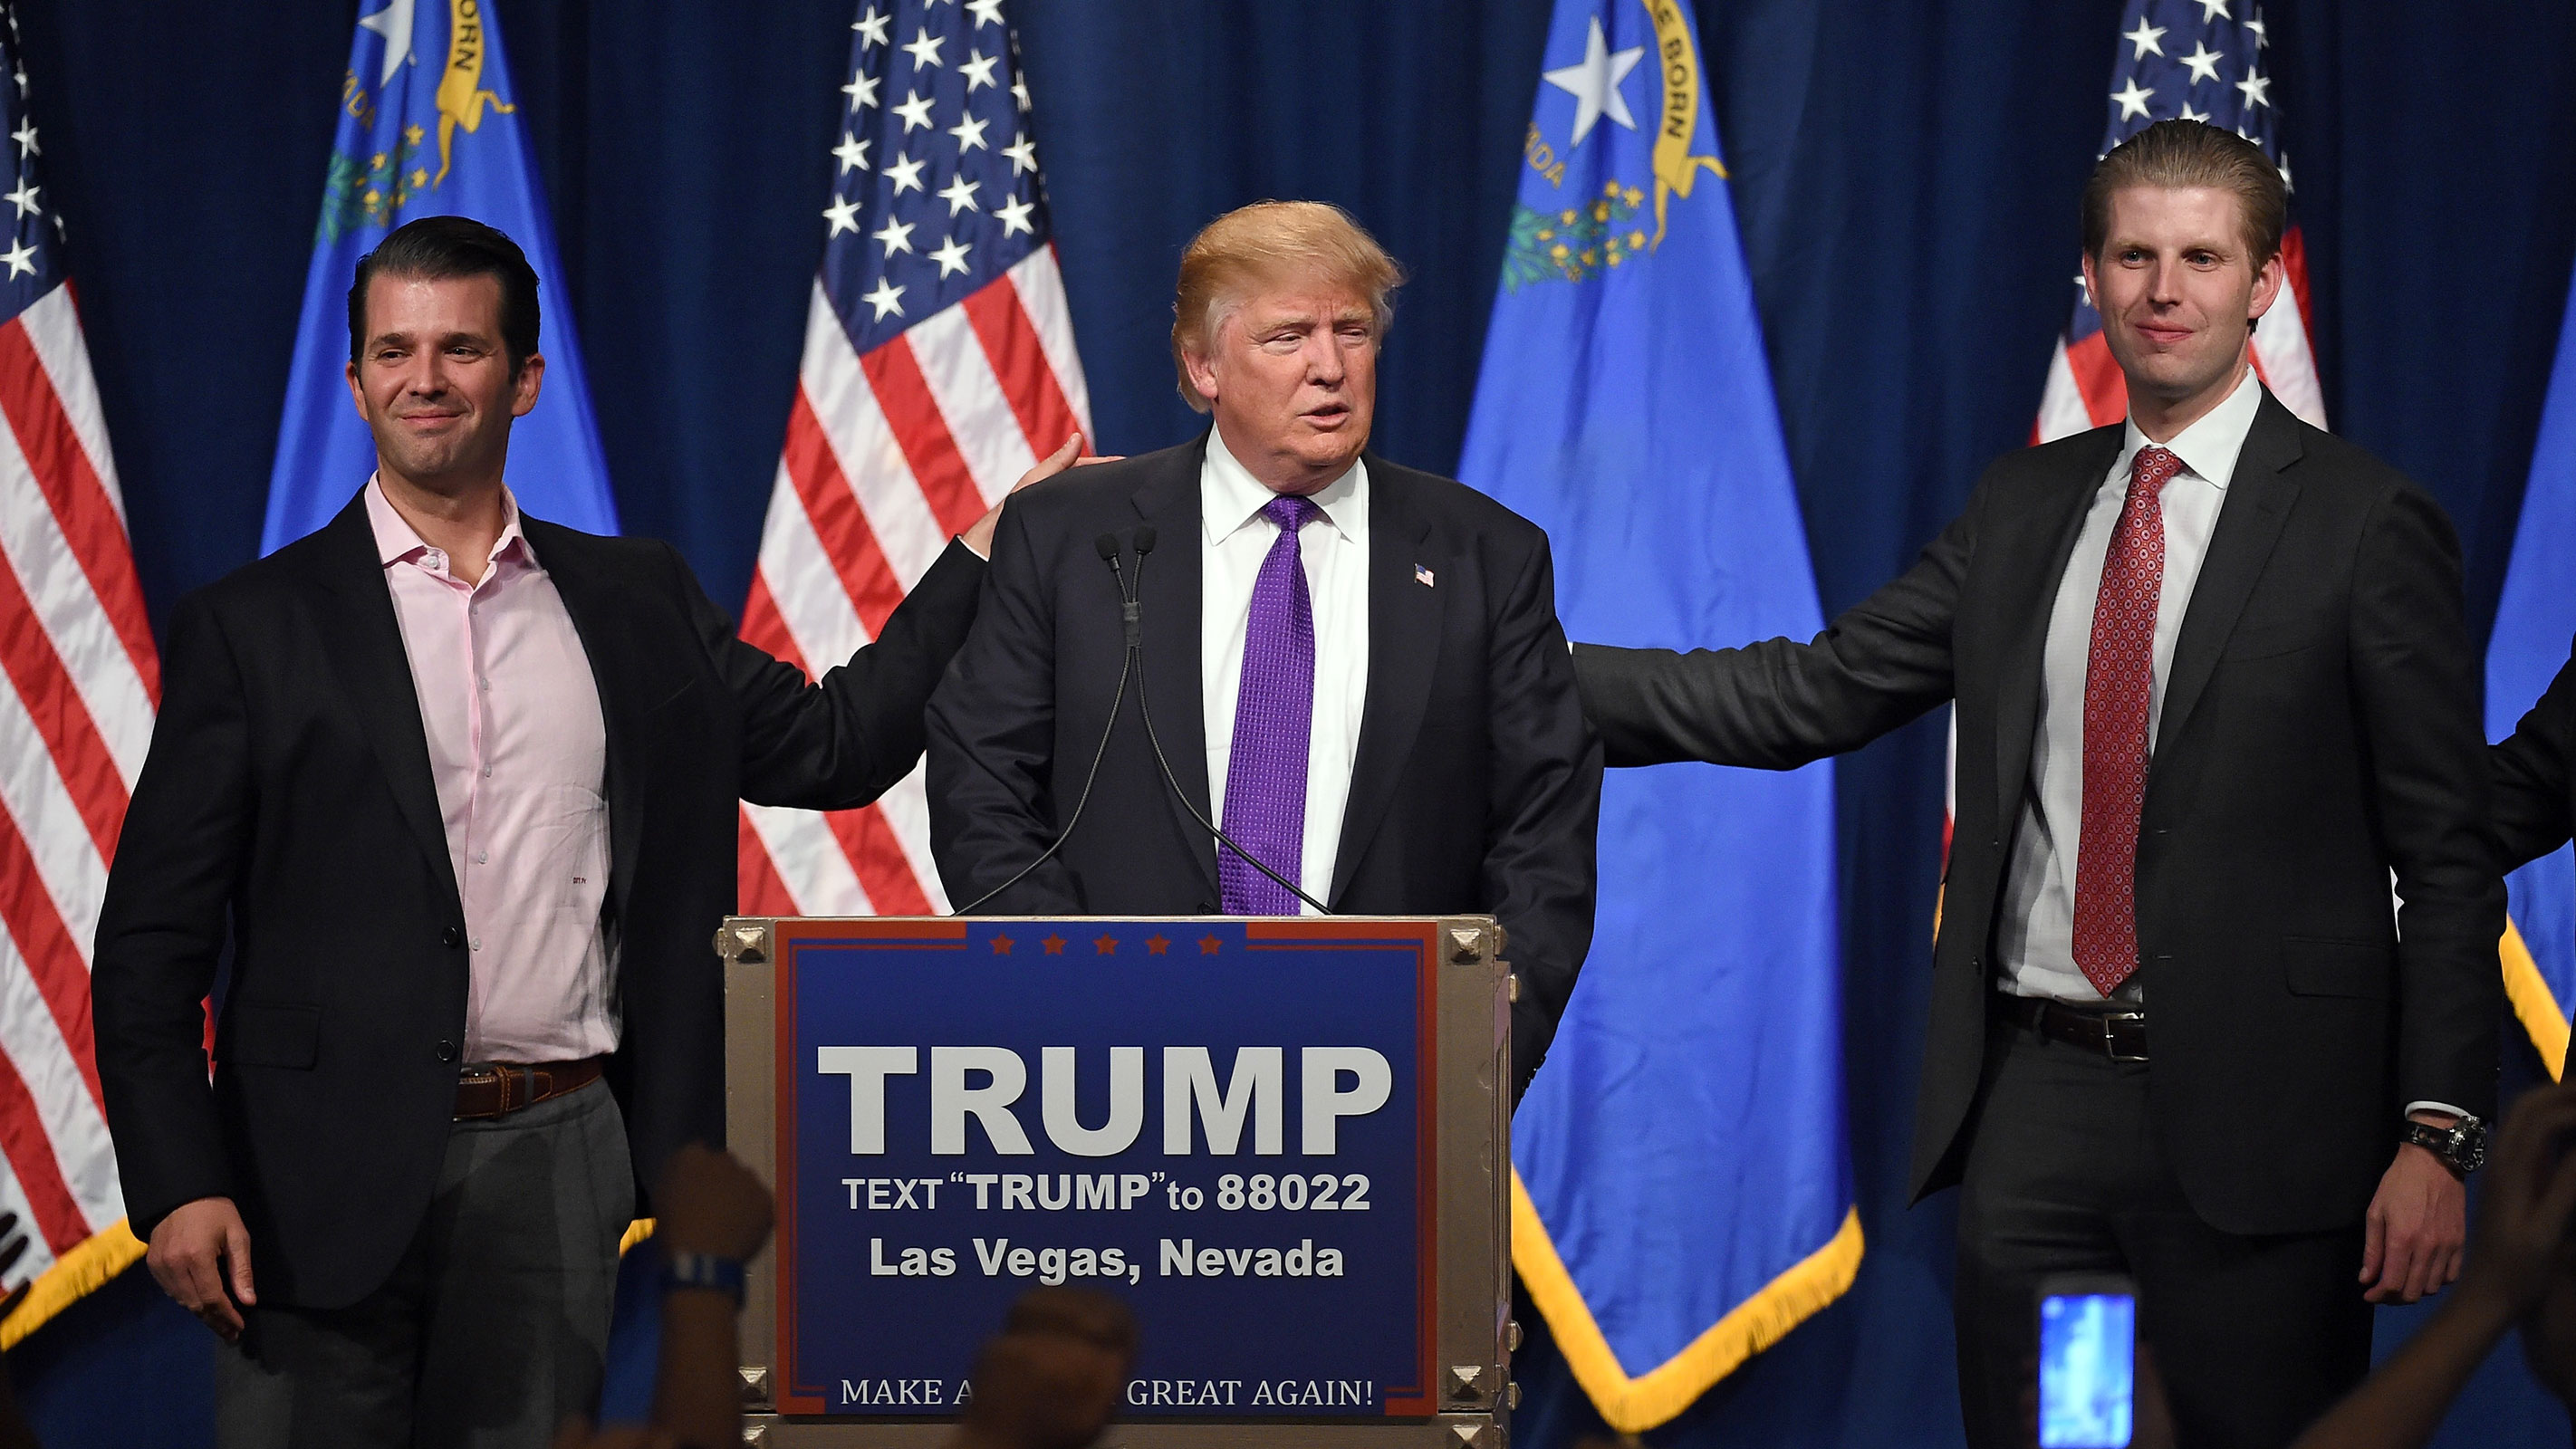 Former President Donald Trump speaks as his sons Donald Trump Jr., left, and Eric Trump look on during an event in 2016 in Las Vegas.